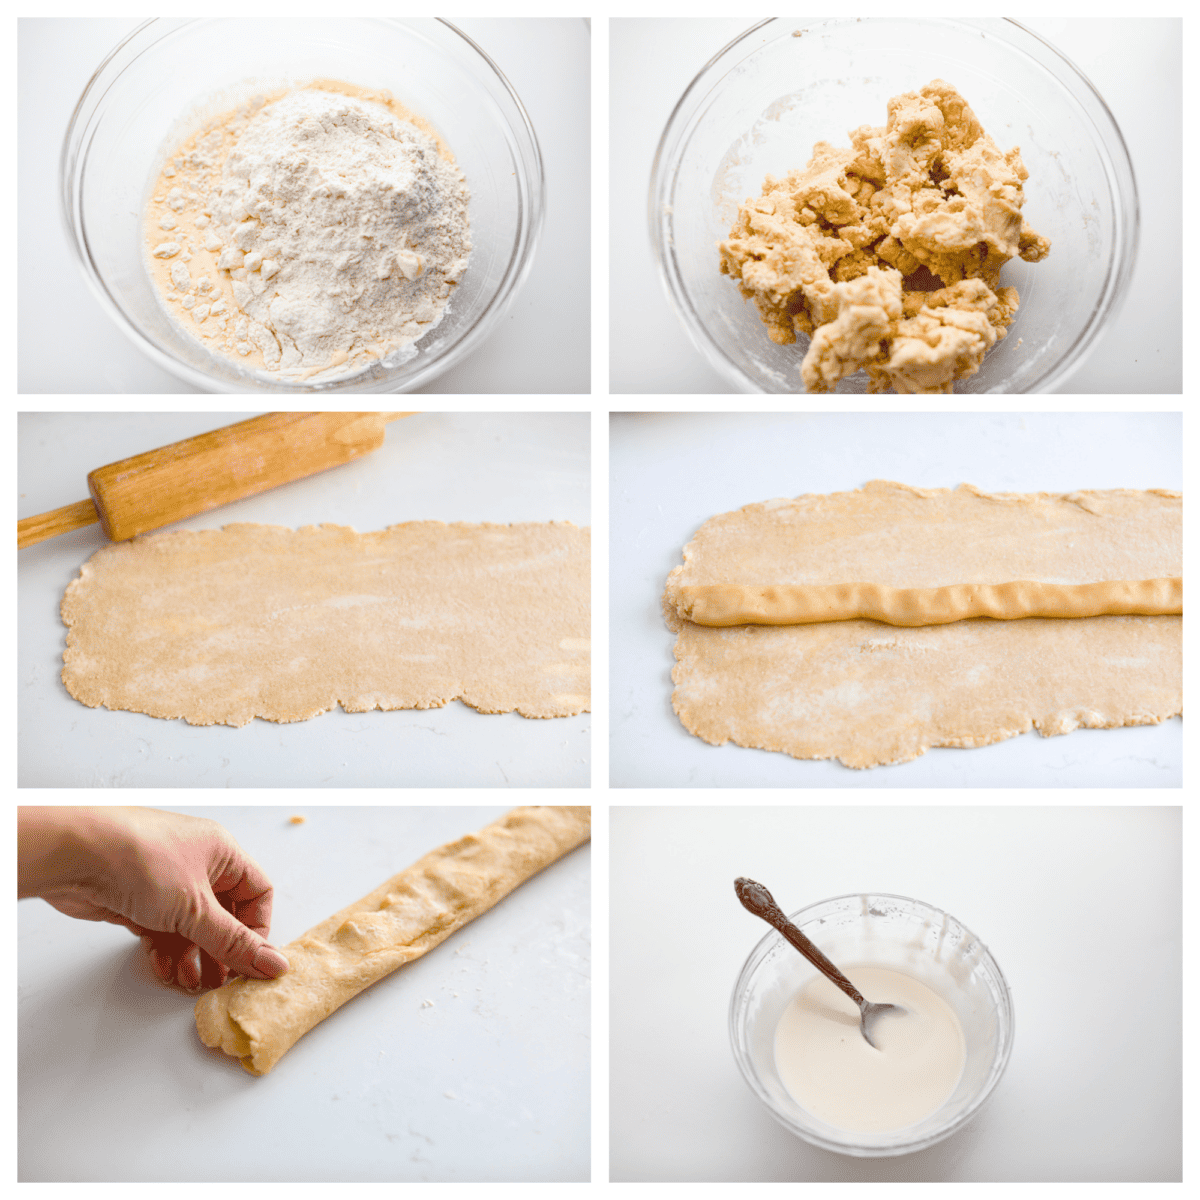 6 photos in a collage showing you how to make the dough and assemble it with the filling. 